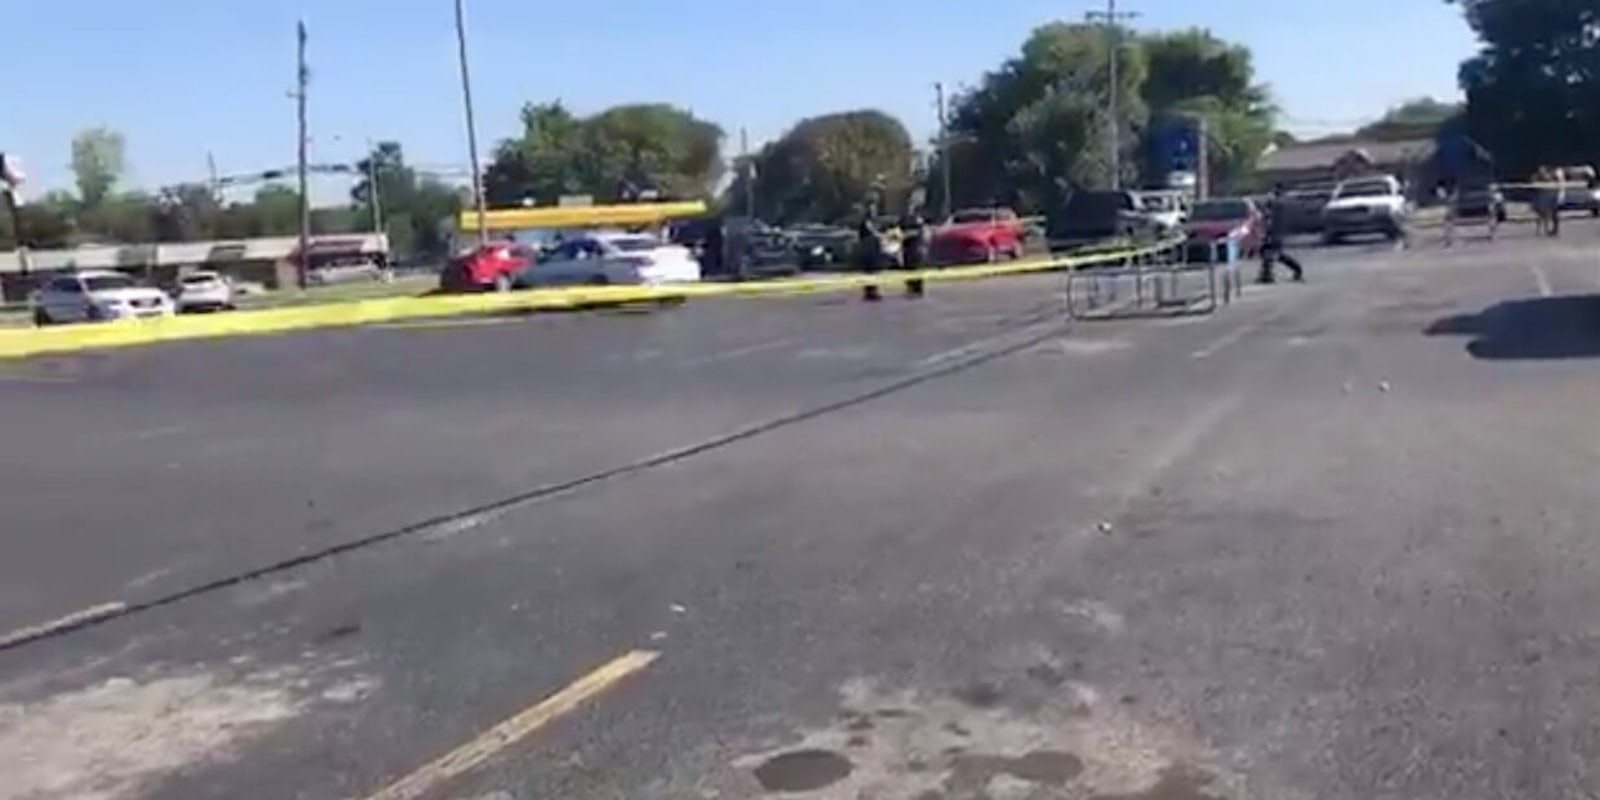 Screengrab from a video shows the scene where the shooting took place